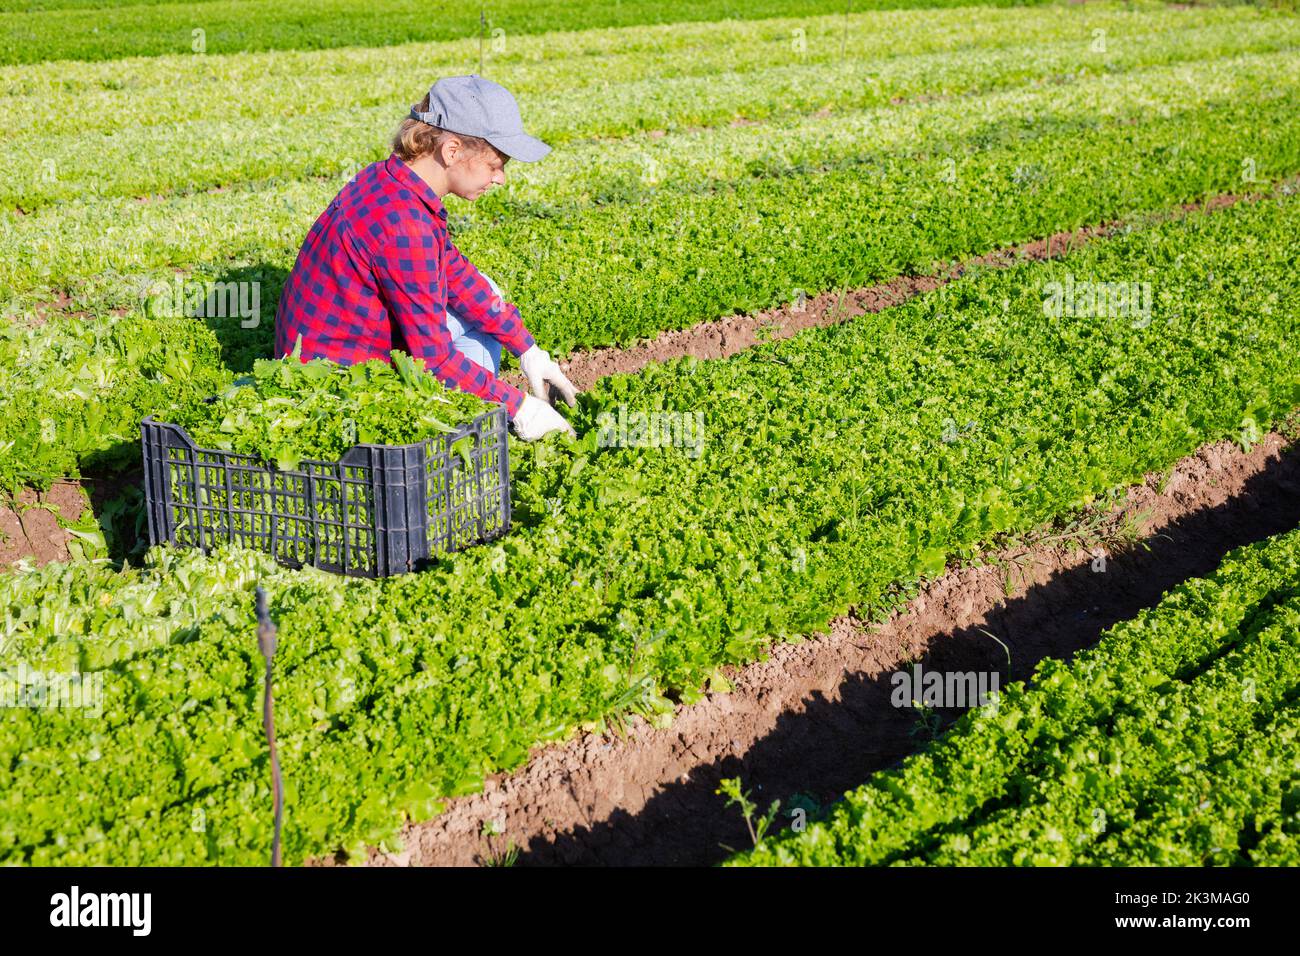 Female farm worker picking harvest of organic green lettuce to crate Stock Photo